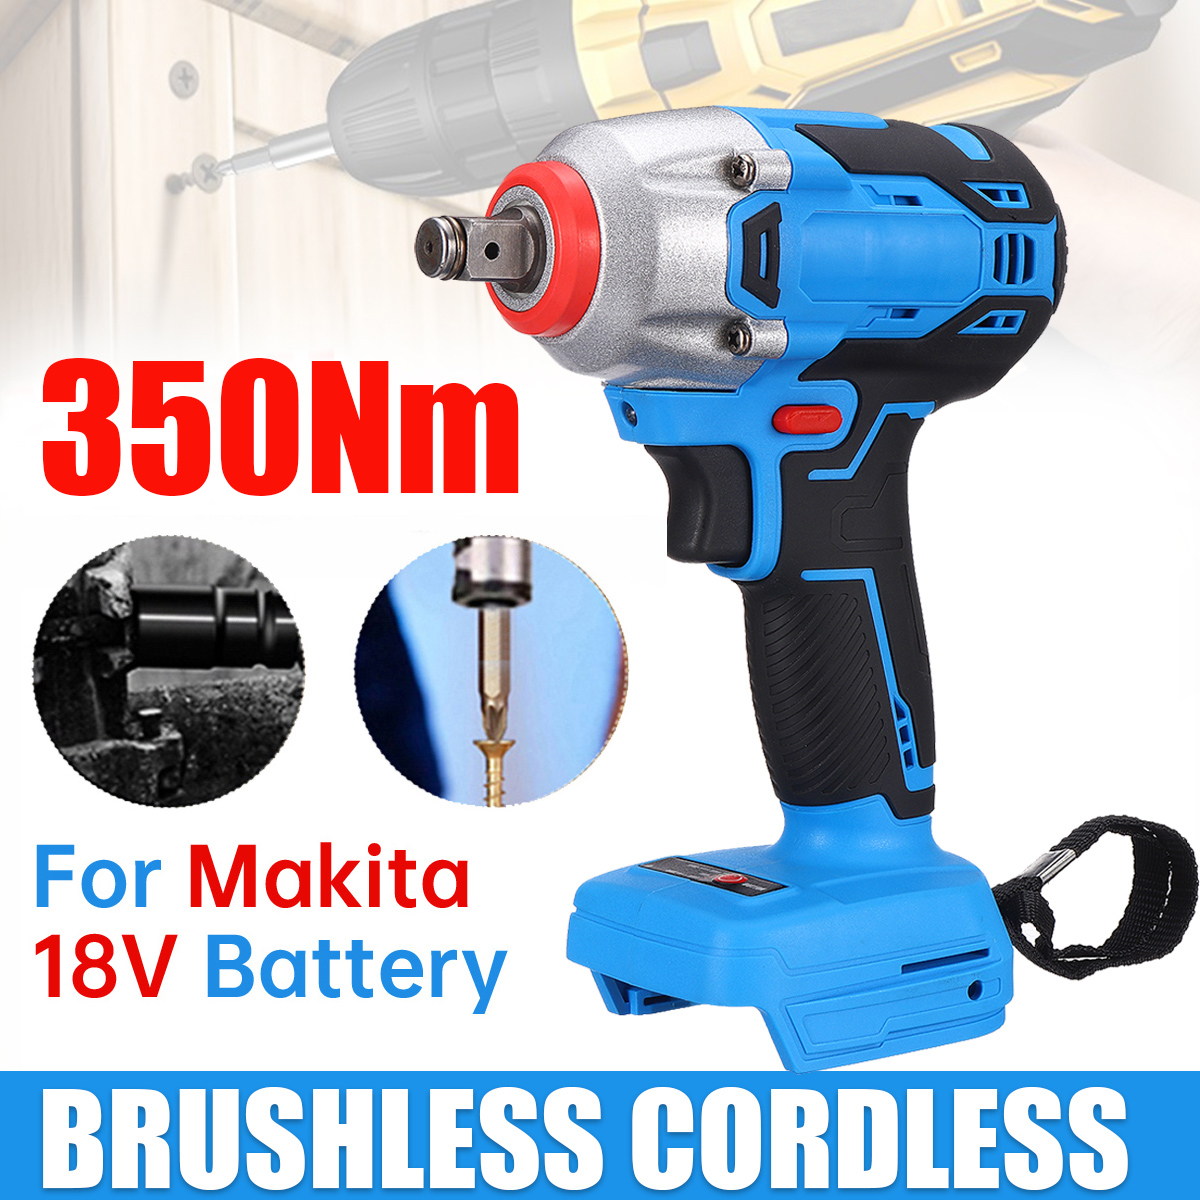 350Nm-Cordless-Brushless-Impact-Wrench-Fit-Makita-Lithoum-Battery-Type-Electric-Wrench-Tool-Only-1889963-2